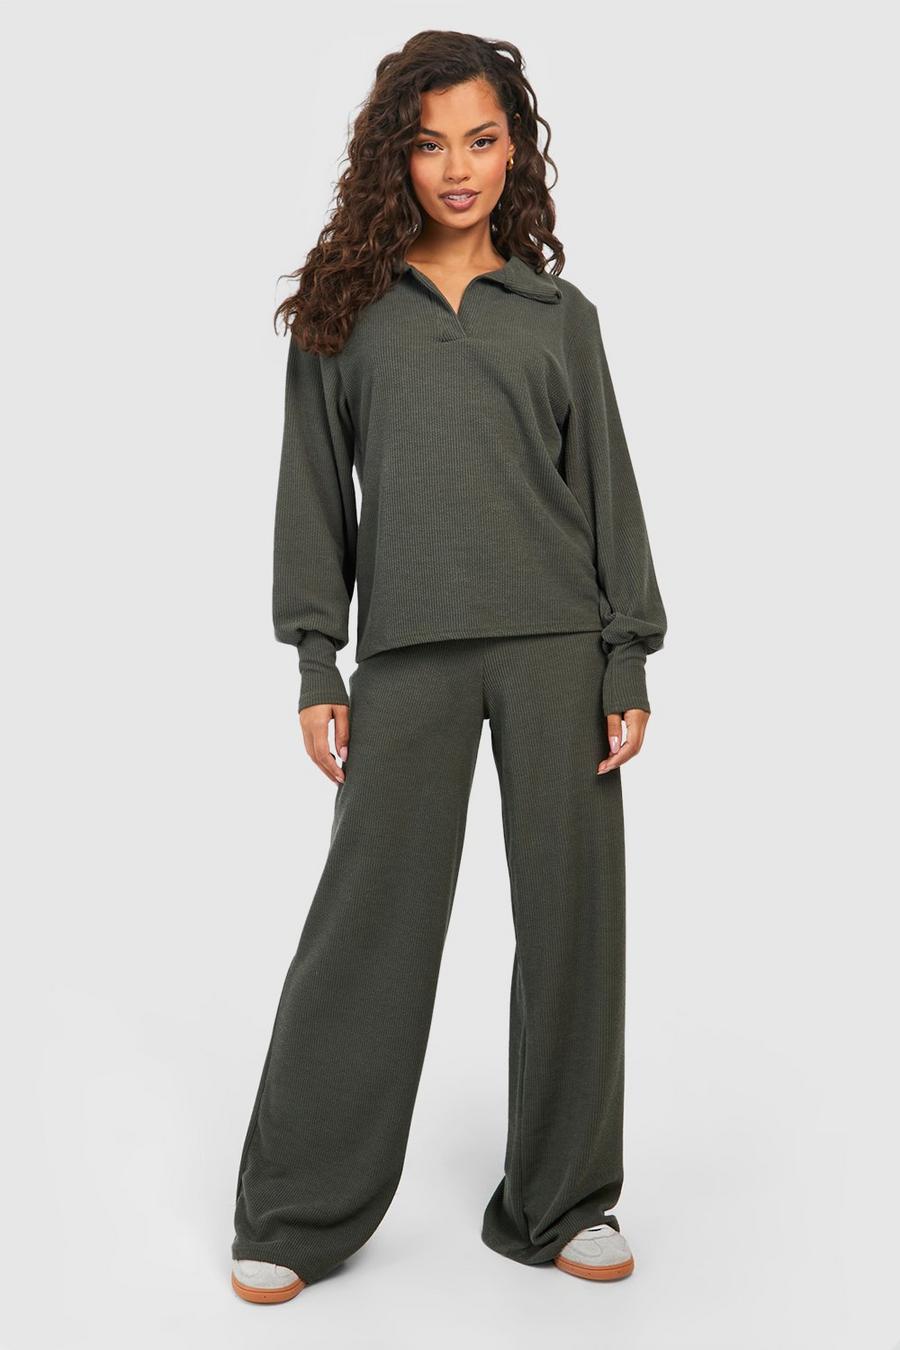 Women's Long Sleeve Crop Top and Flare Pants 2 Piece Set (Grey) IN